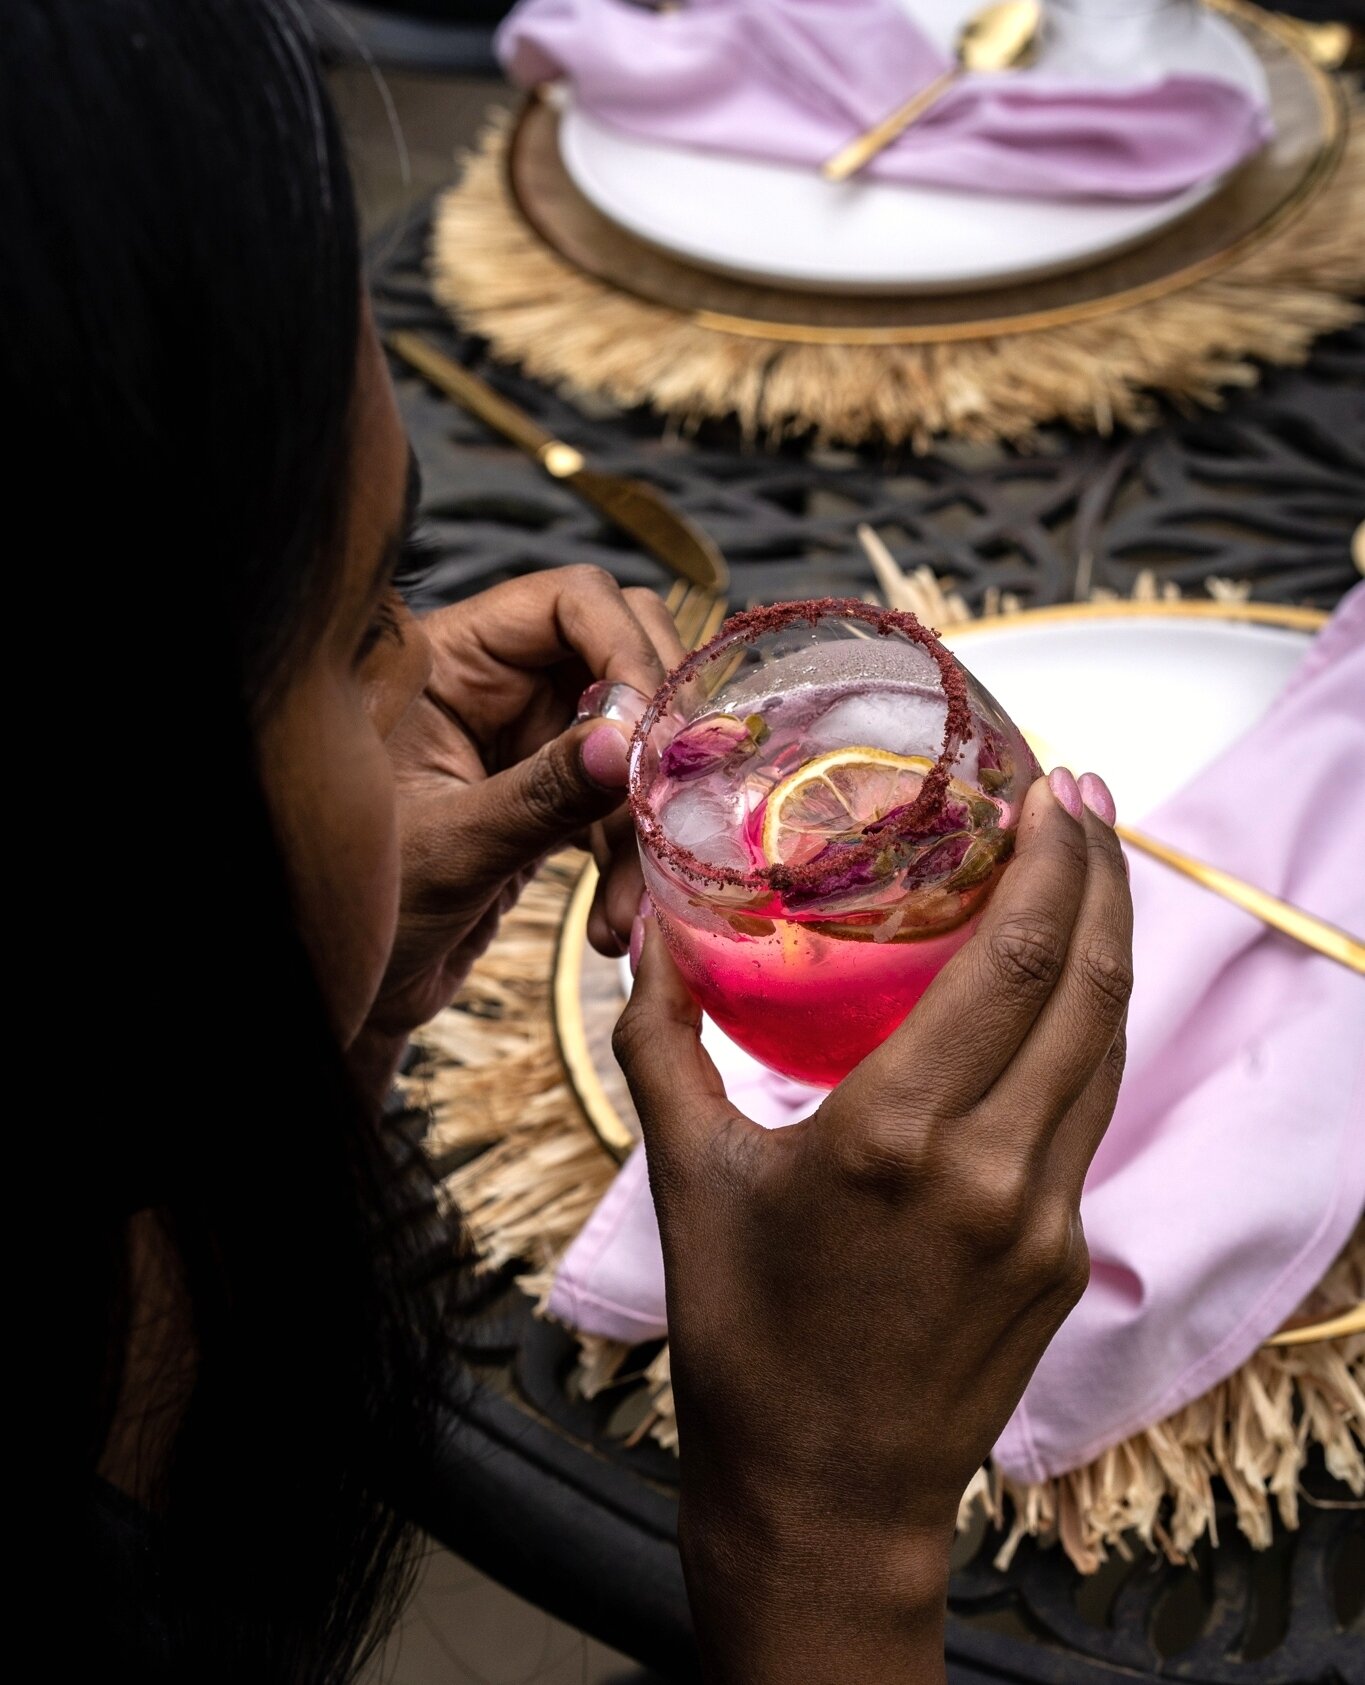 Hen party? Private celebration? Corporate event or product launch? Whatever it is, we can craft a drinks menu that will complement your theme and wow your guests 🤩 ⁠
.⁠
.⁠
.⁠
.⁠
.⁠
.⁠
⁠
#cocktailbar #craftcocktails #mixologist #imbibegram ⁠
#cocktai